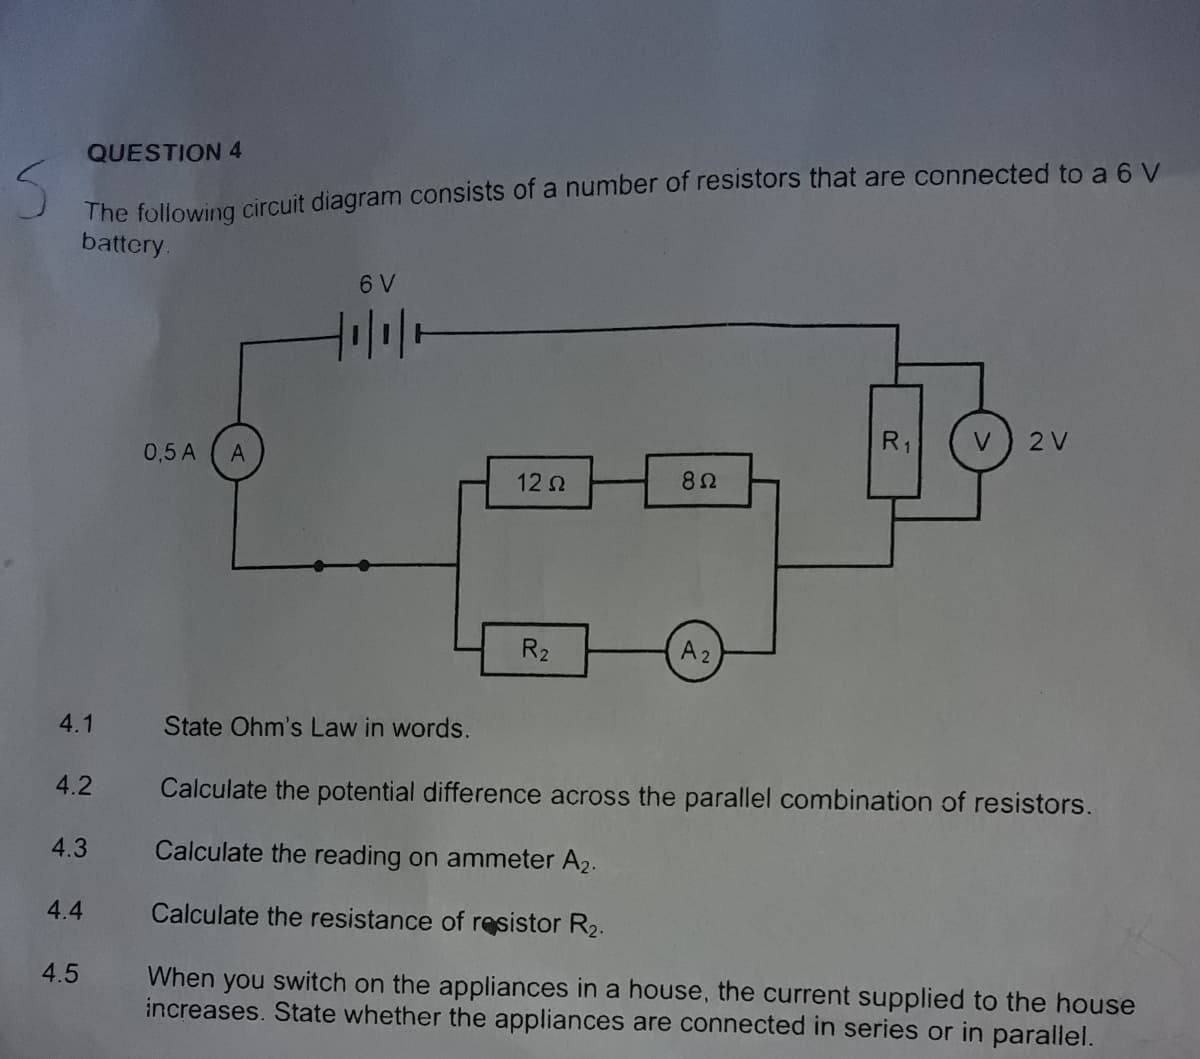 QUESTION 4
The following circuit diagram consists of a number of resistors that are connected to a 6 V
battery.
6 V
R1
2 V
0,5 A
A
12 2
82
R2
A2
4.1
State Ohm's Law in words.
4.2
Calculate the potential difference across the parallel combination of resistors.
4.3
Calculate the reading on ammeter A2.
4.4
Calculate the resistance of resistor R2.
4.5
When you switch on the appliances in a house, the current supplied to the house
increases. State whether the appliances are connected in series or in parallel.
